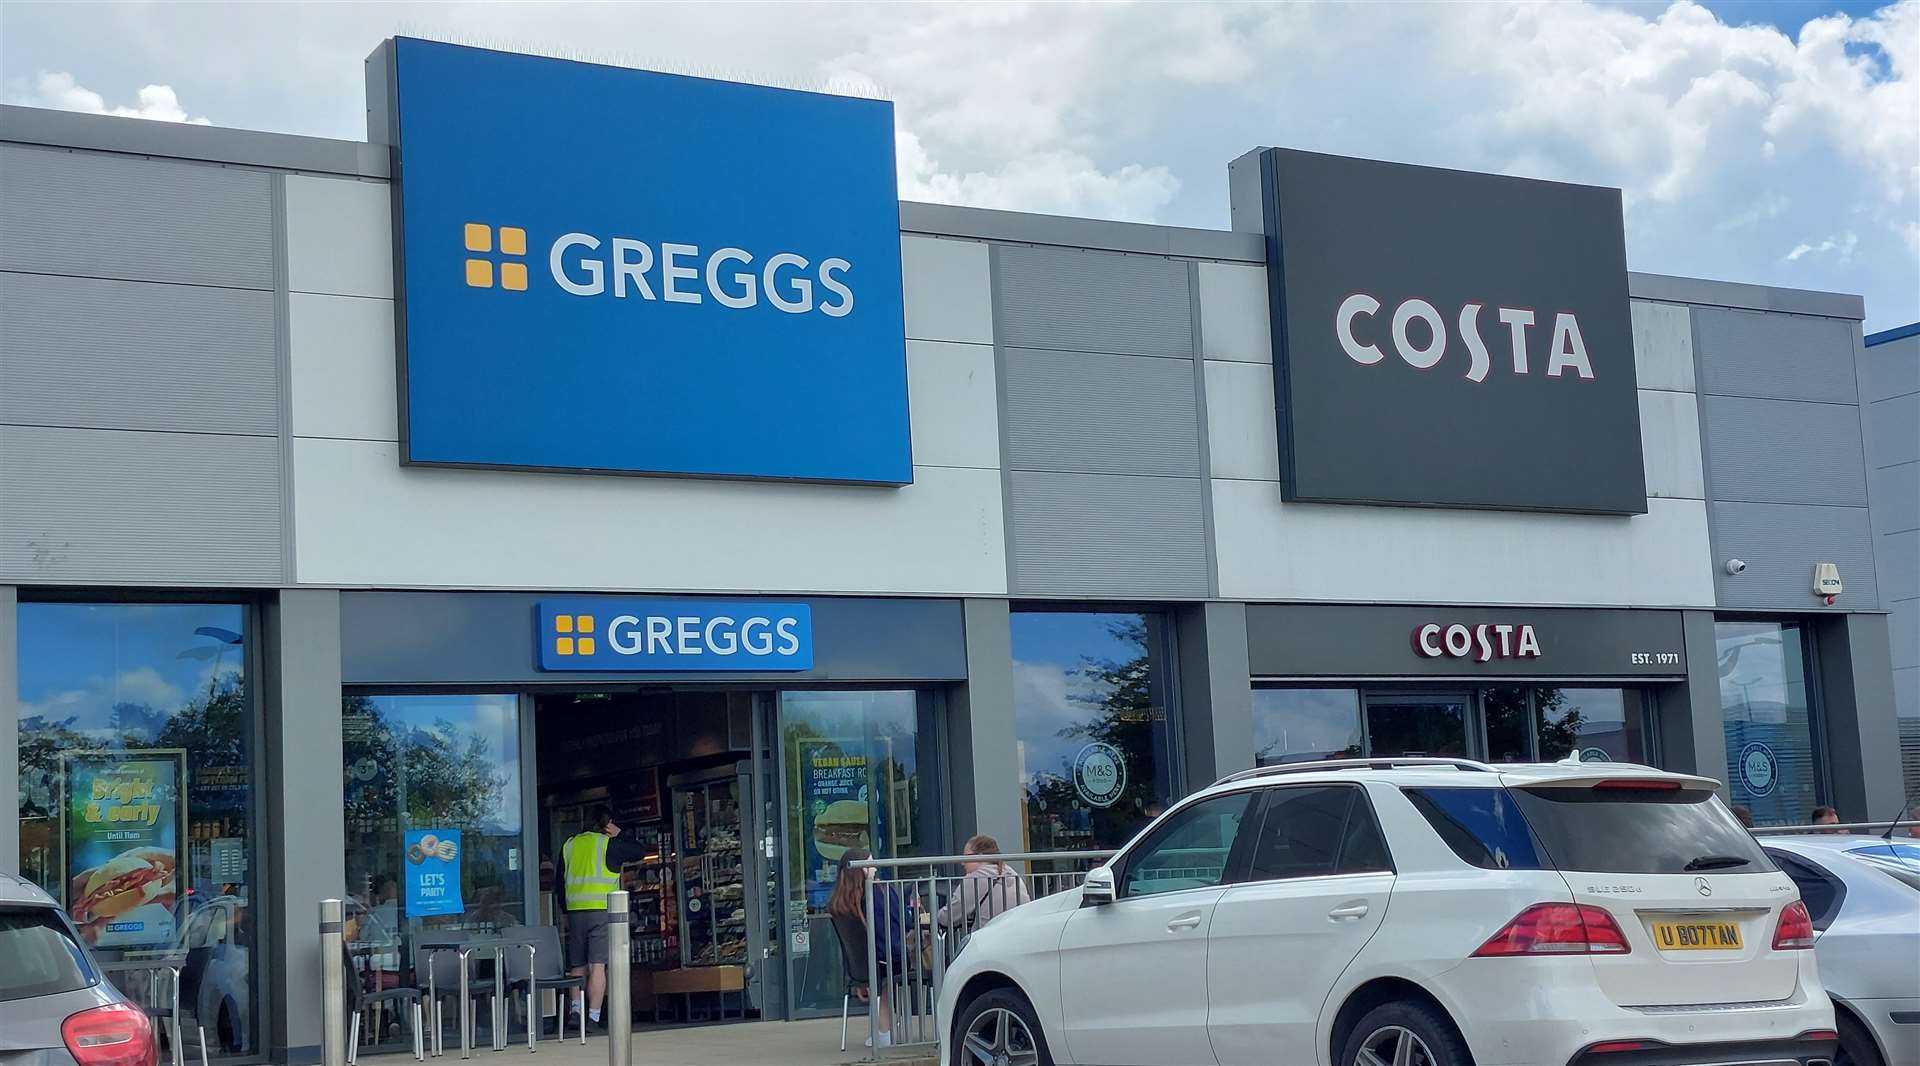 Ashford's second Greggs has opened next to Costa and Hobbycraft